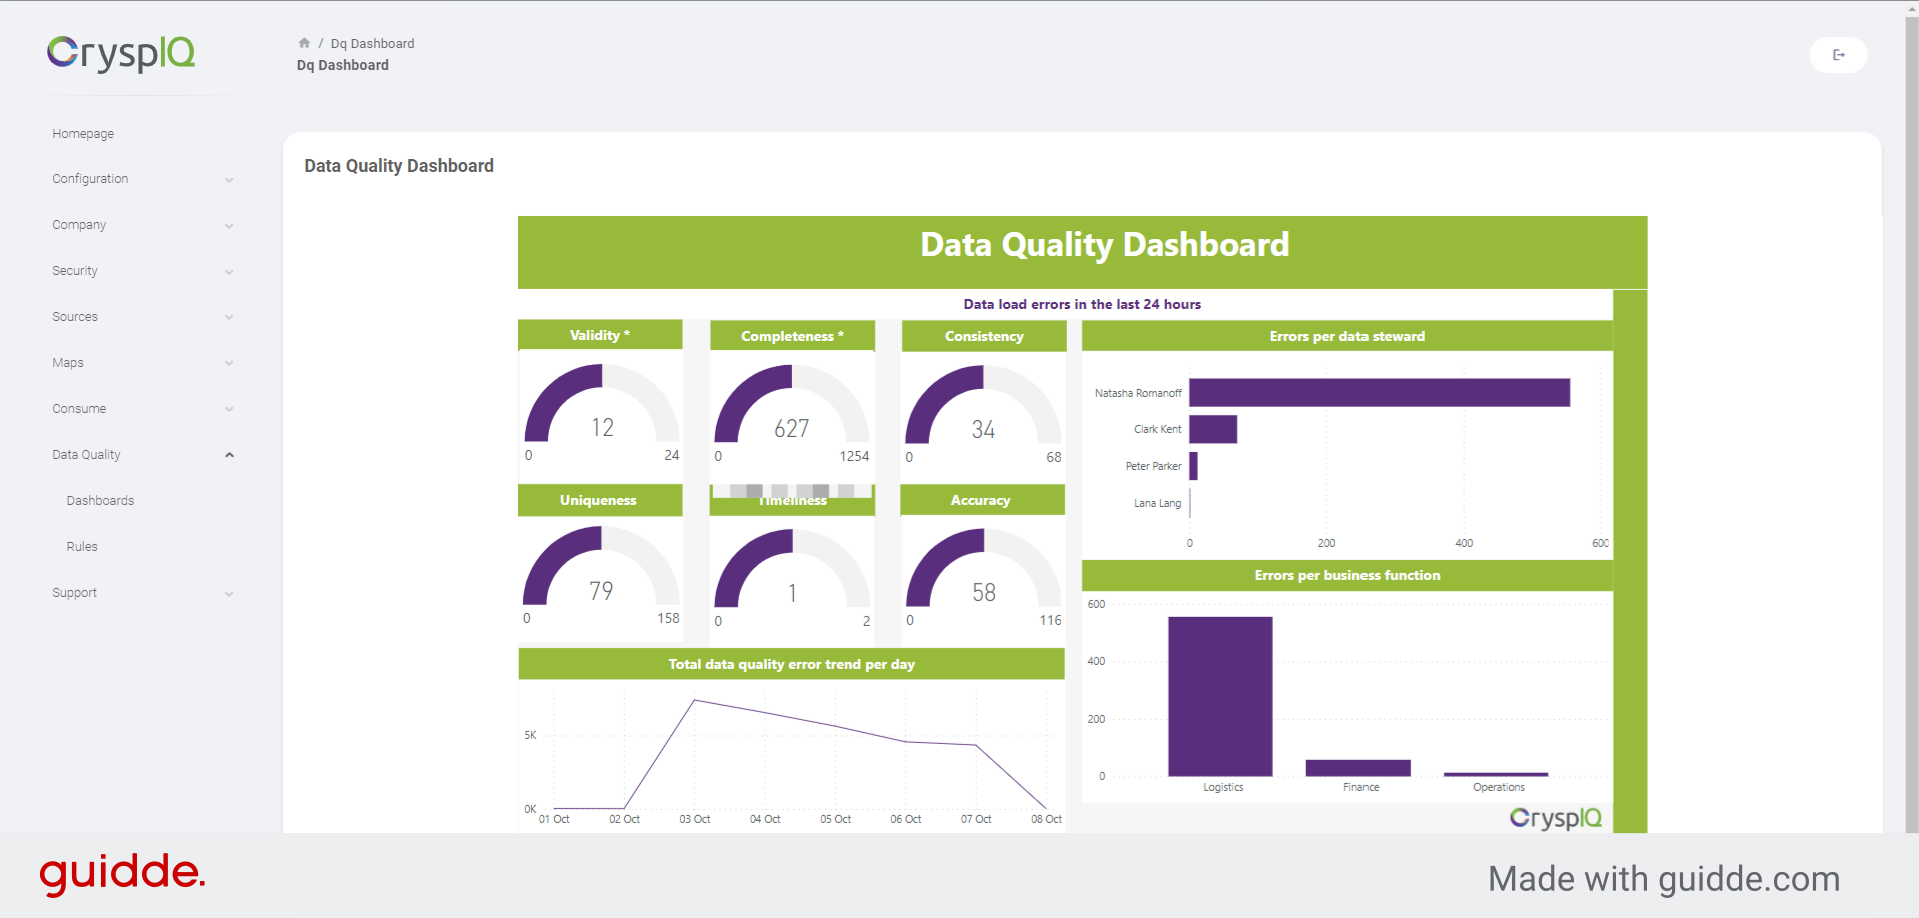 View the Data Quality Dashboard